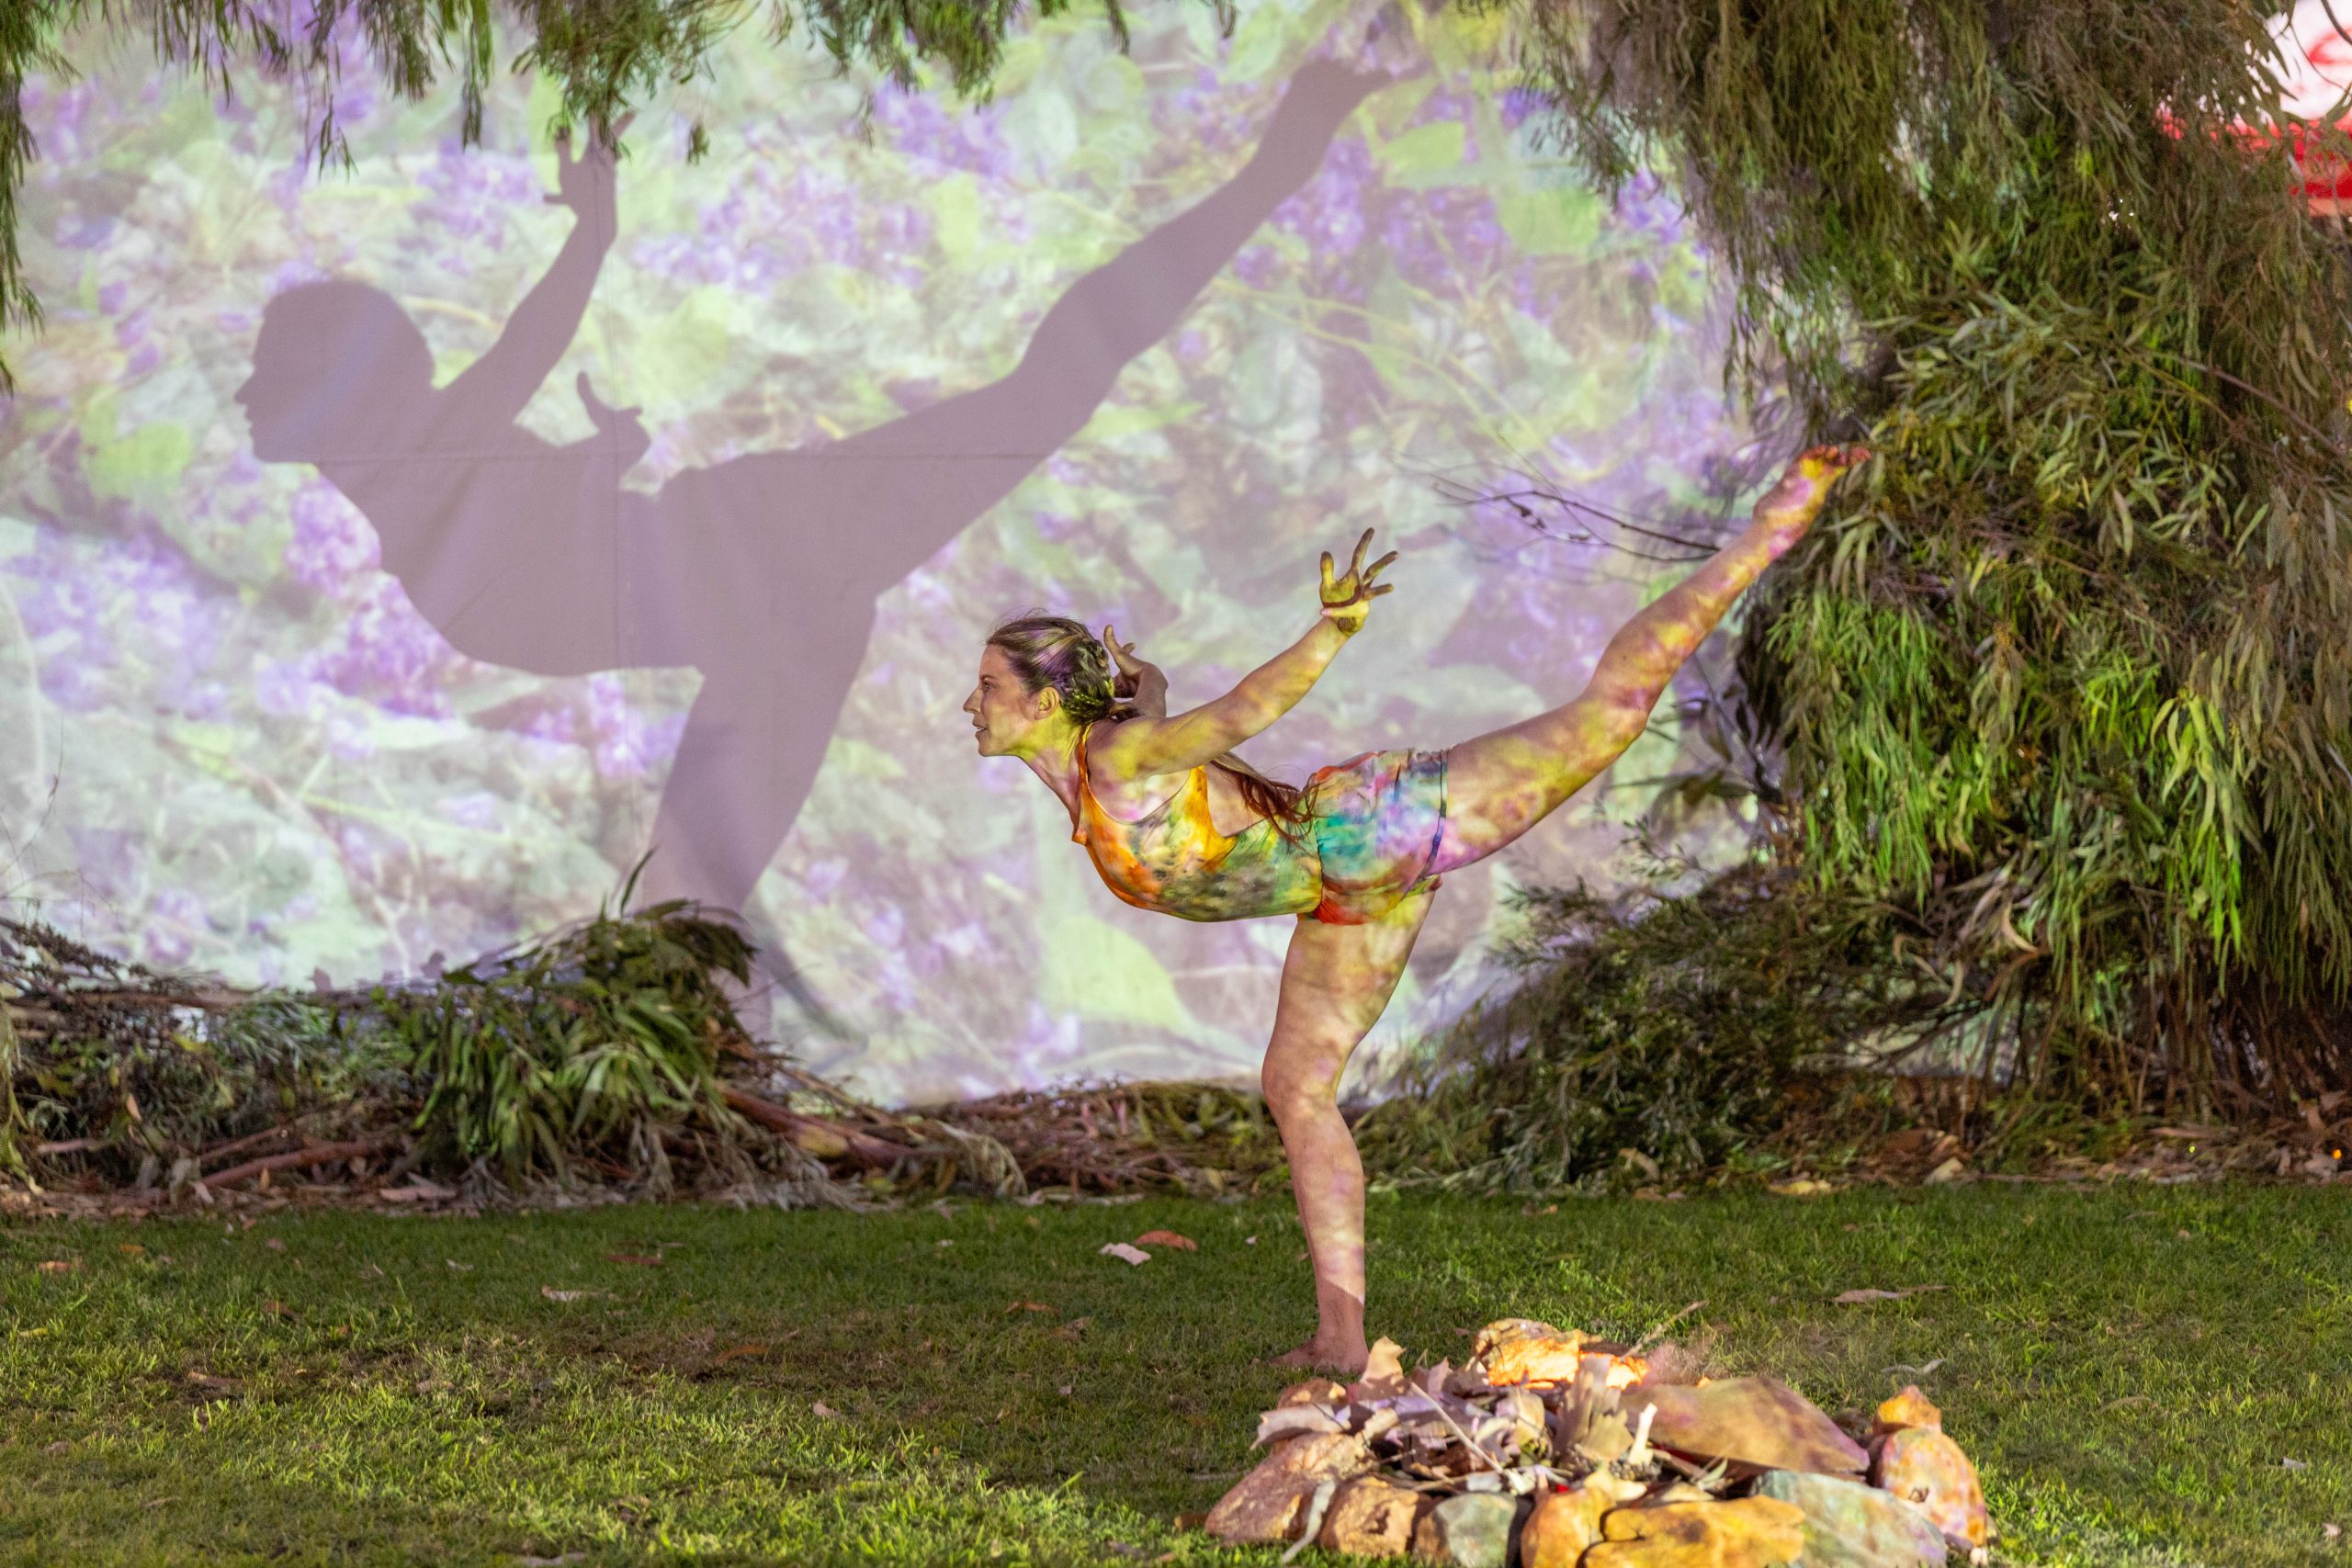 a performer dancing on grass with colourful projections overlaid